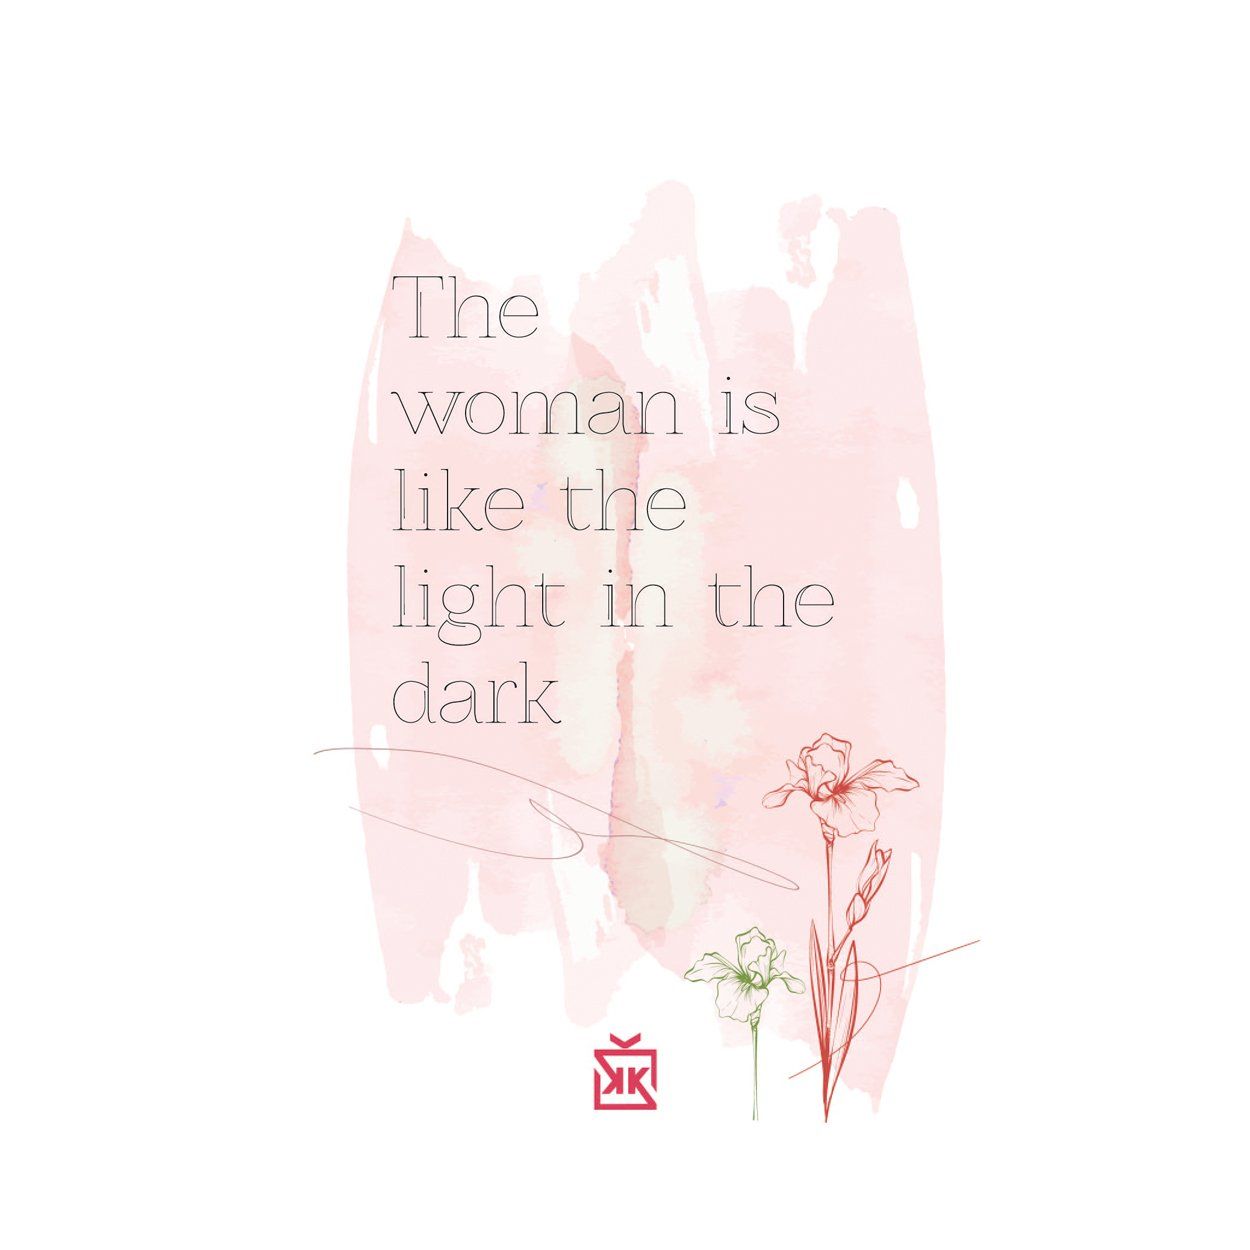 630678-the-woman-is-like-the-light-in-the-dark-motto-karti